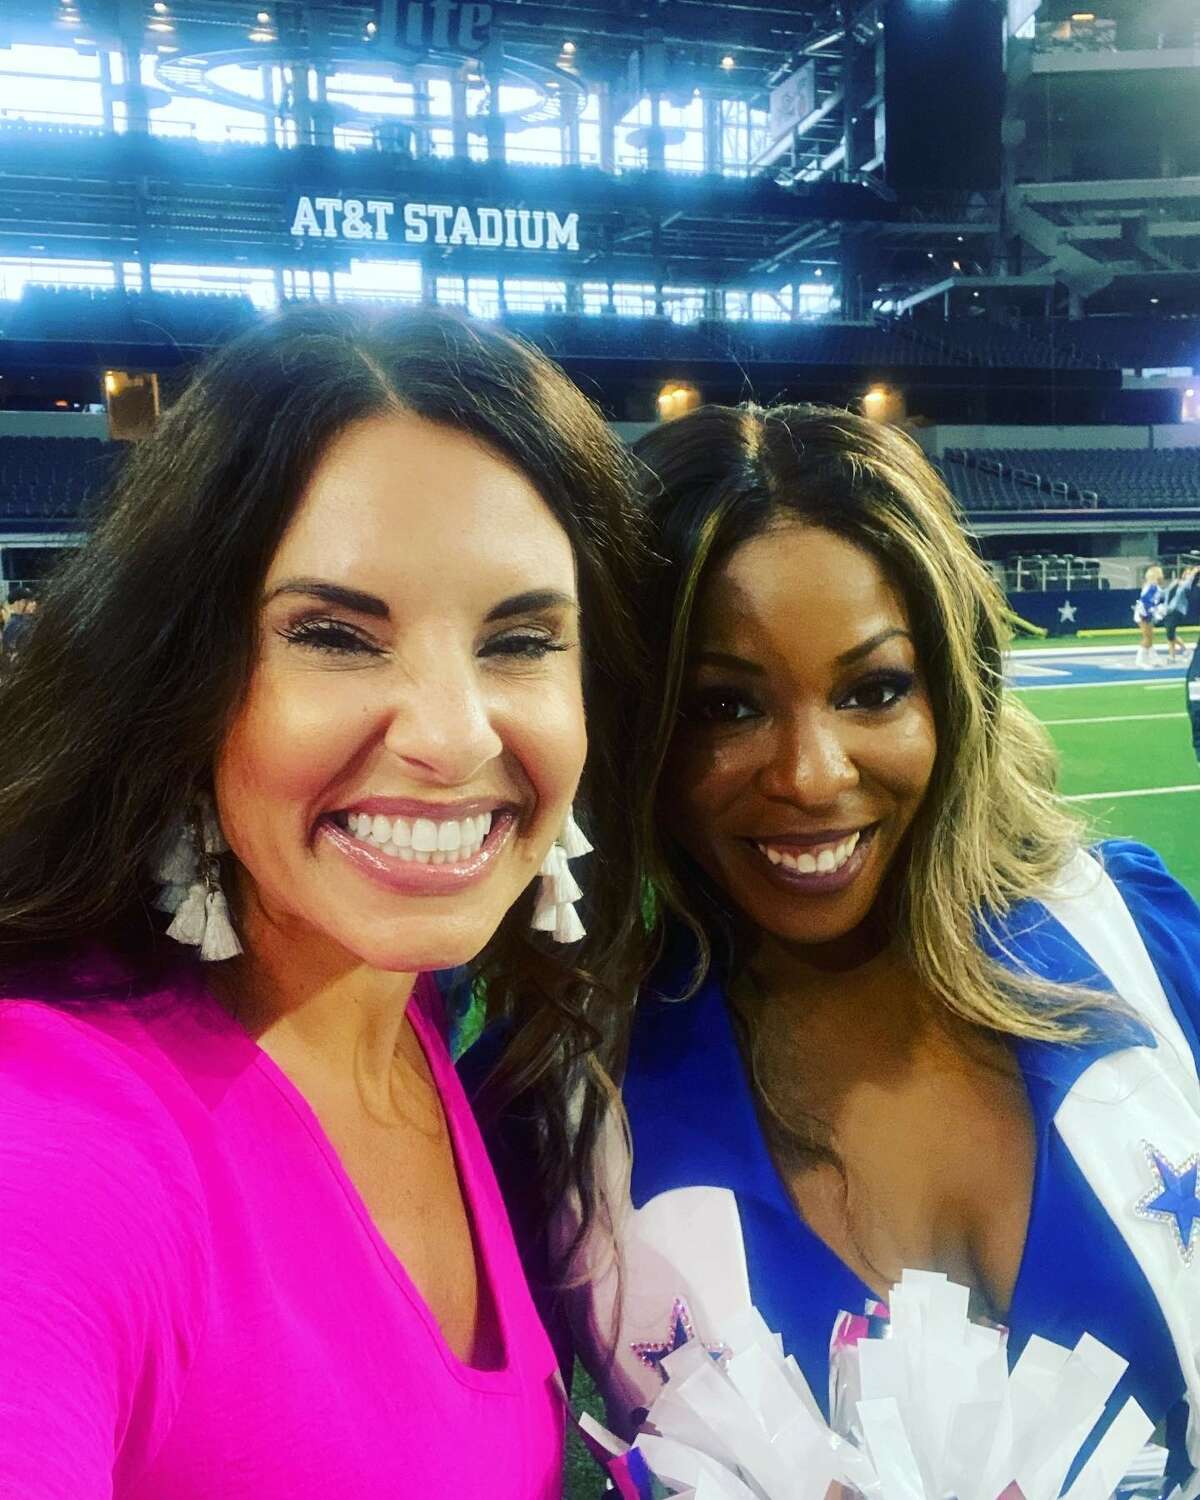 DK Dance Productions founder, owner and instructor Darci Kay Ward, right, of Jerseyville, with new Dallas Cowboys Cheerleader Kayla Hayes, 22, of Florissant, Missouri, Aug. 22 at AT&T Stadium in Dallas for the Cowboys' "Meet the Team" event.